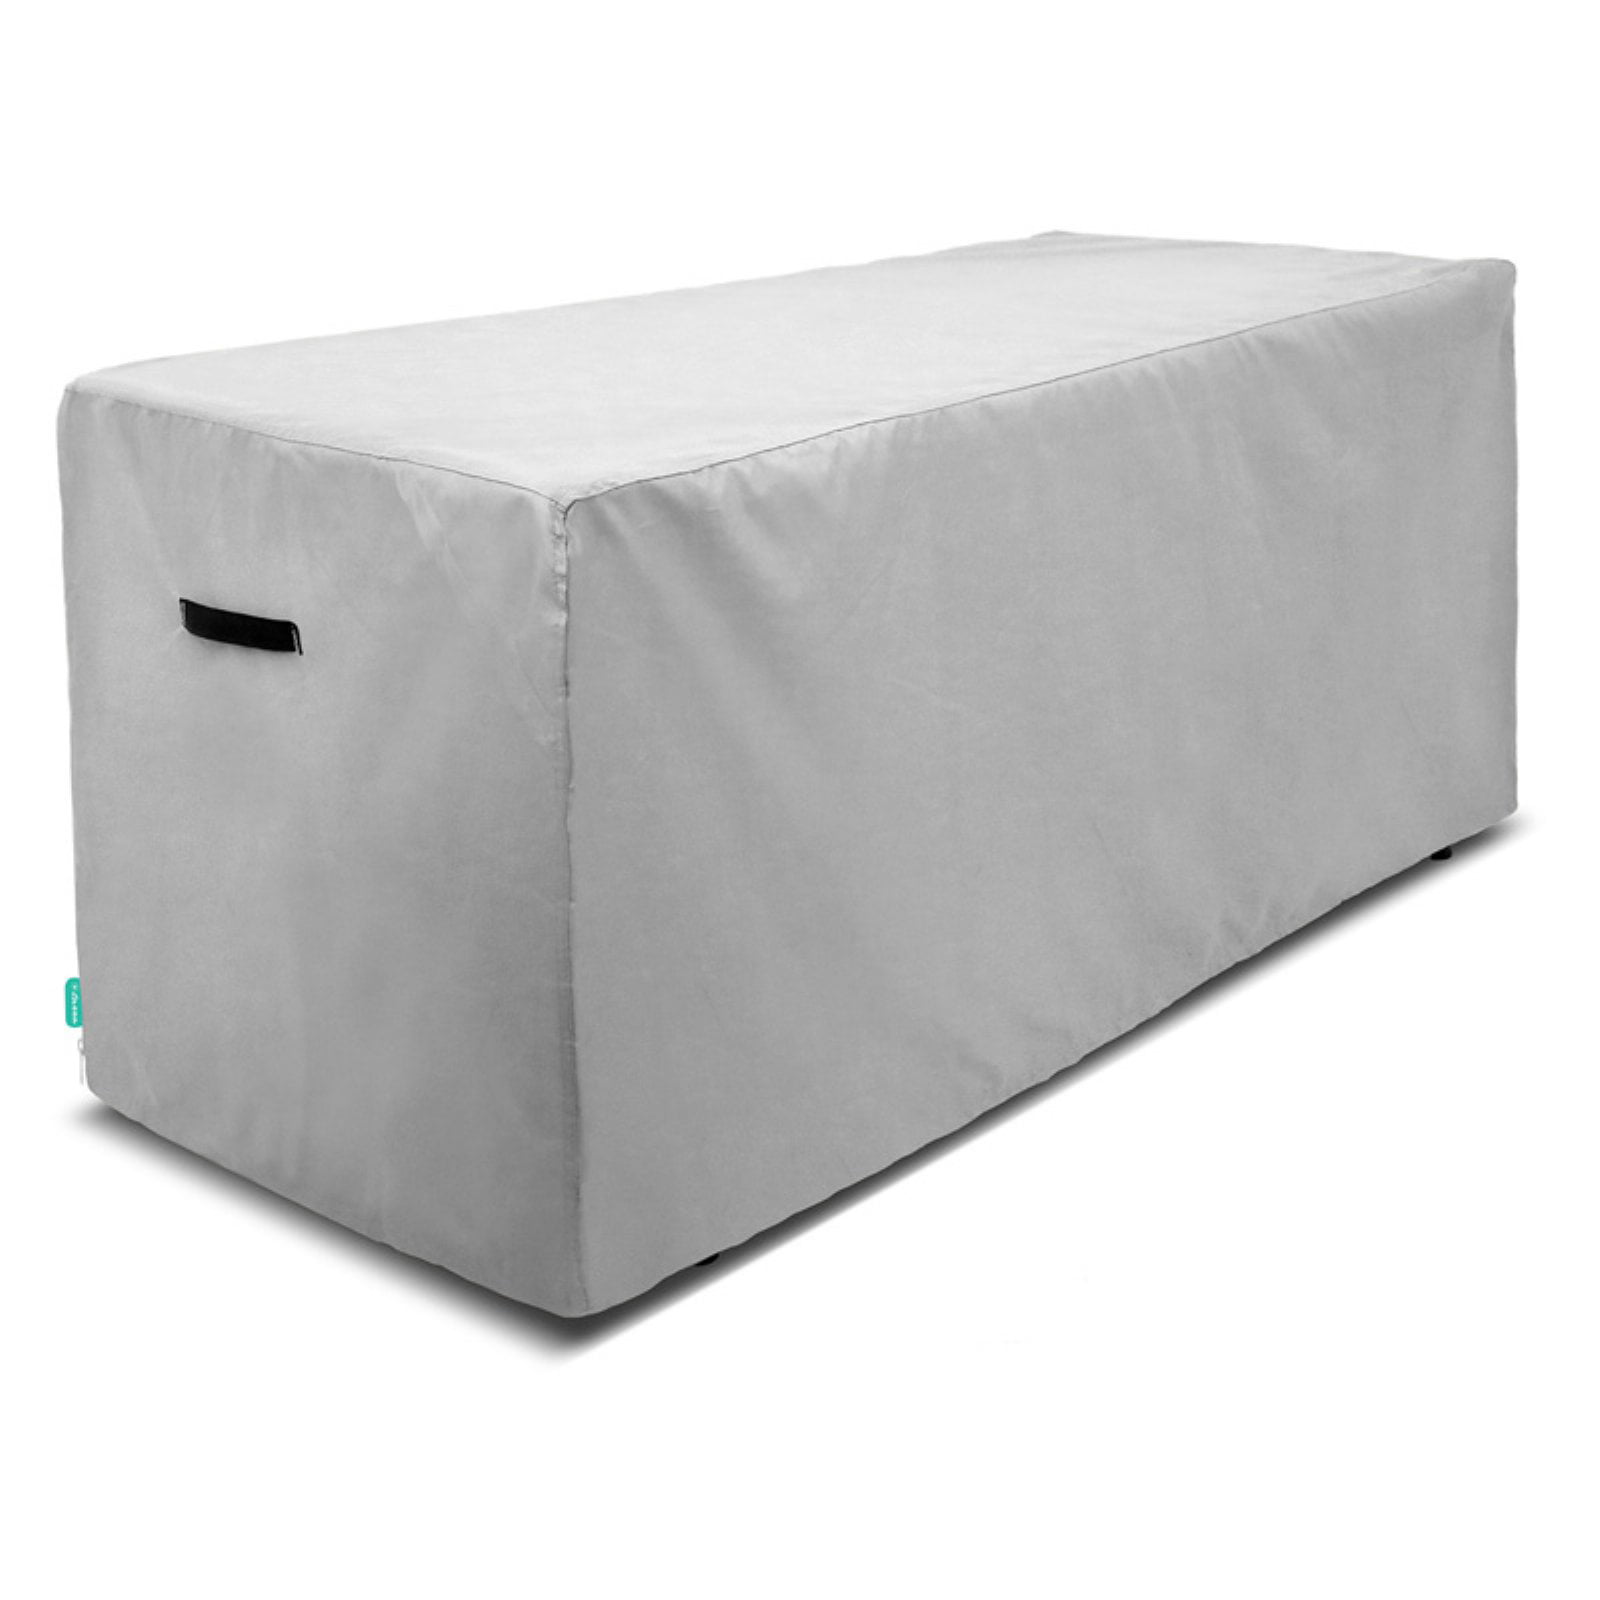 Patio Rectangular Table Cover, Universal Patio Table Cover